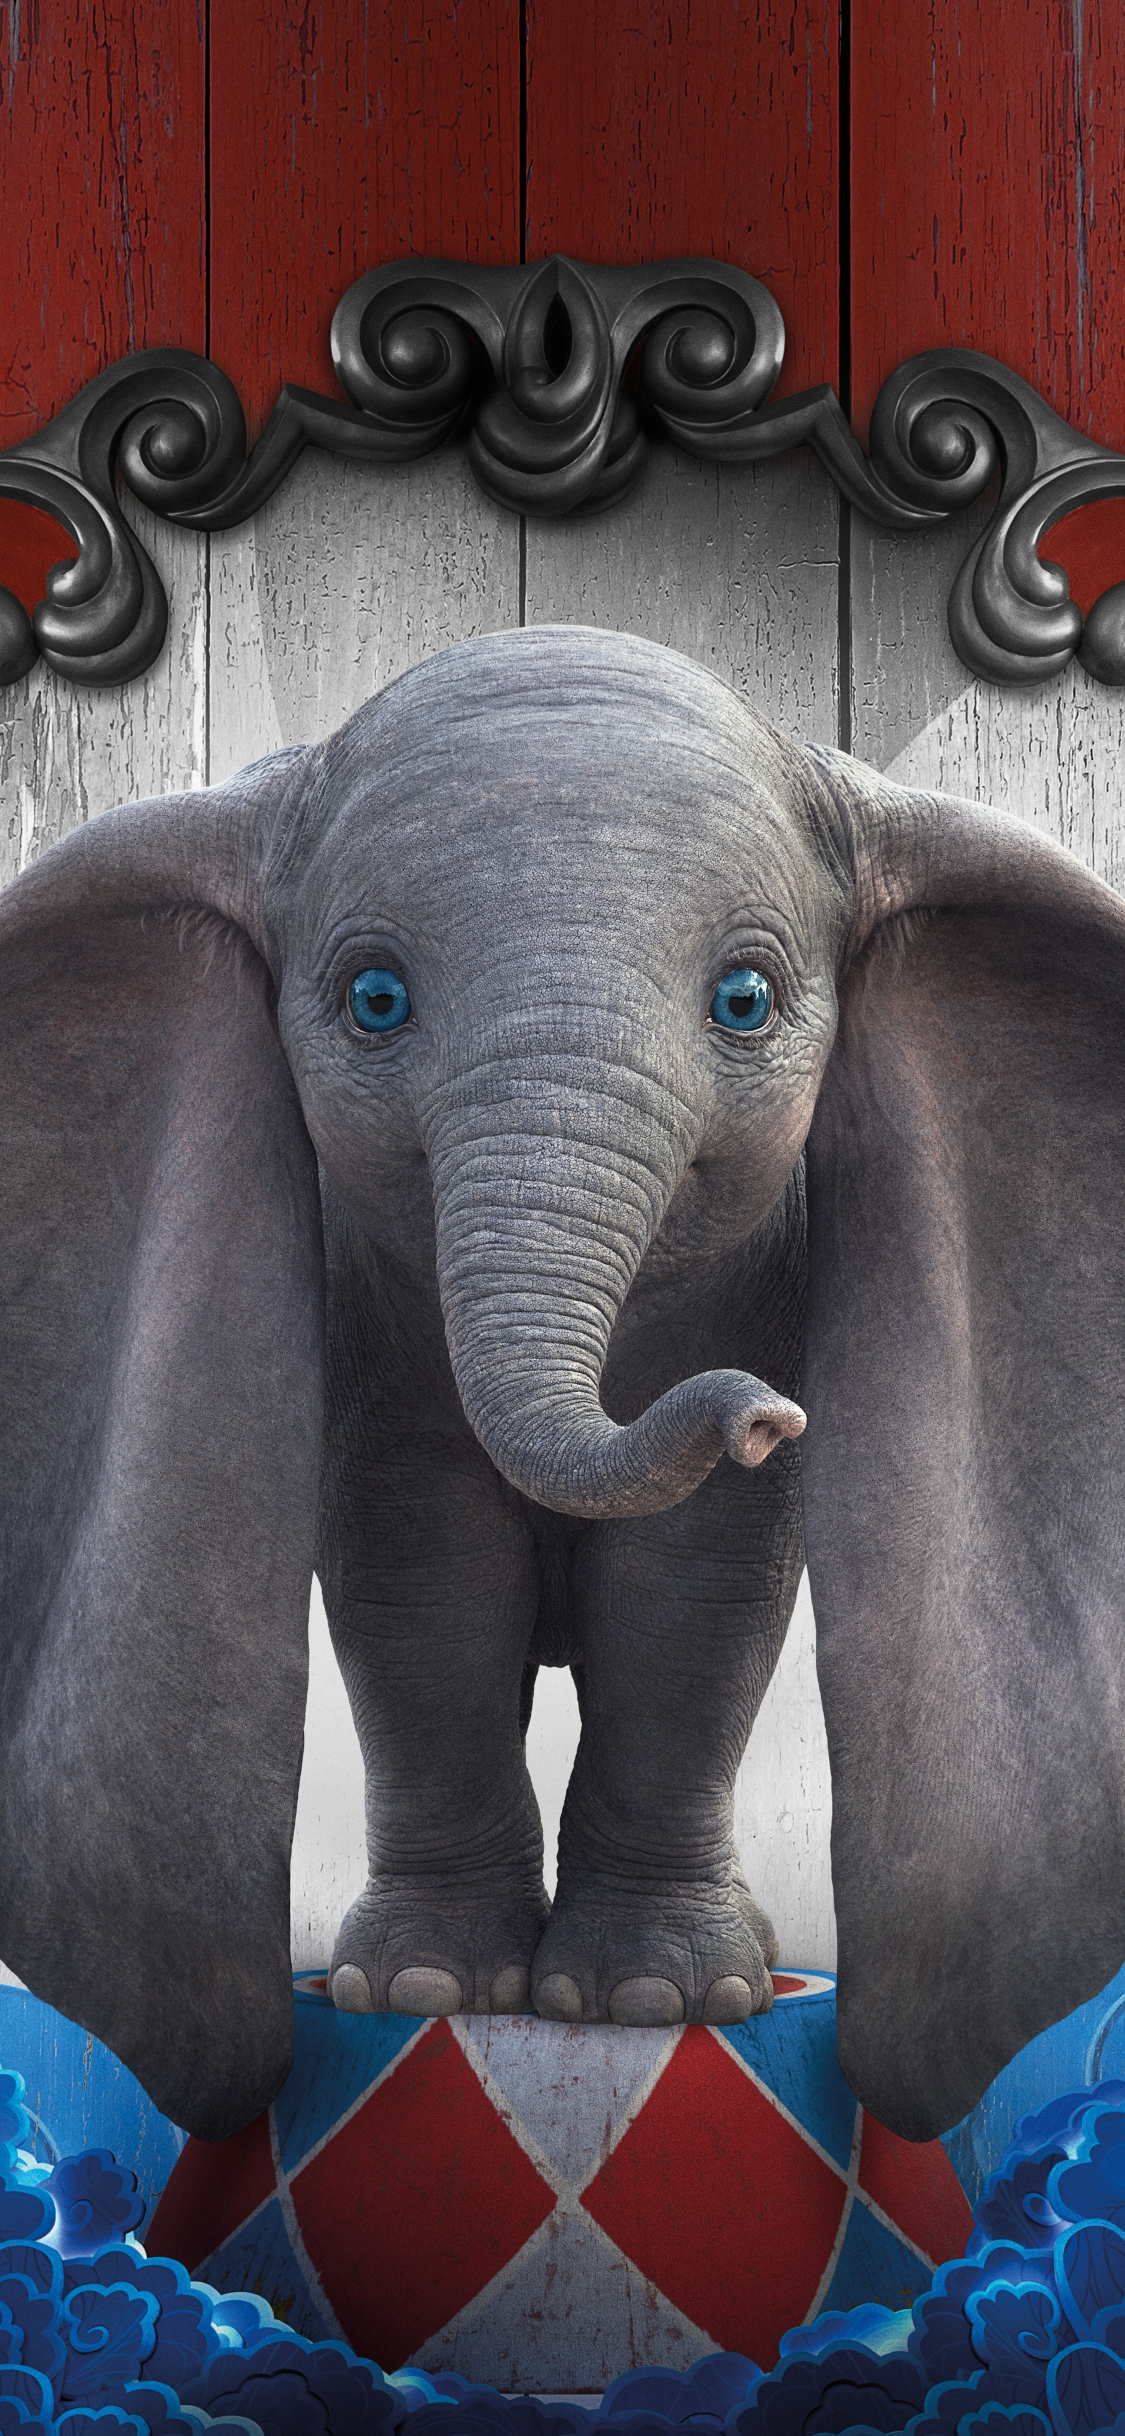 Download wallpaper 1125x2436 dumbo, cute, baby elephant, 2019 movie, iphone x, 1125x2436 HD background, 18585